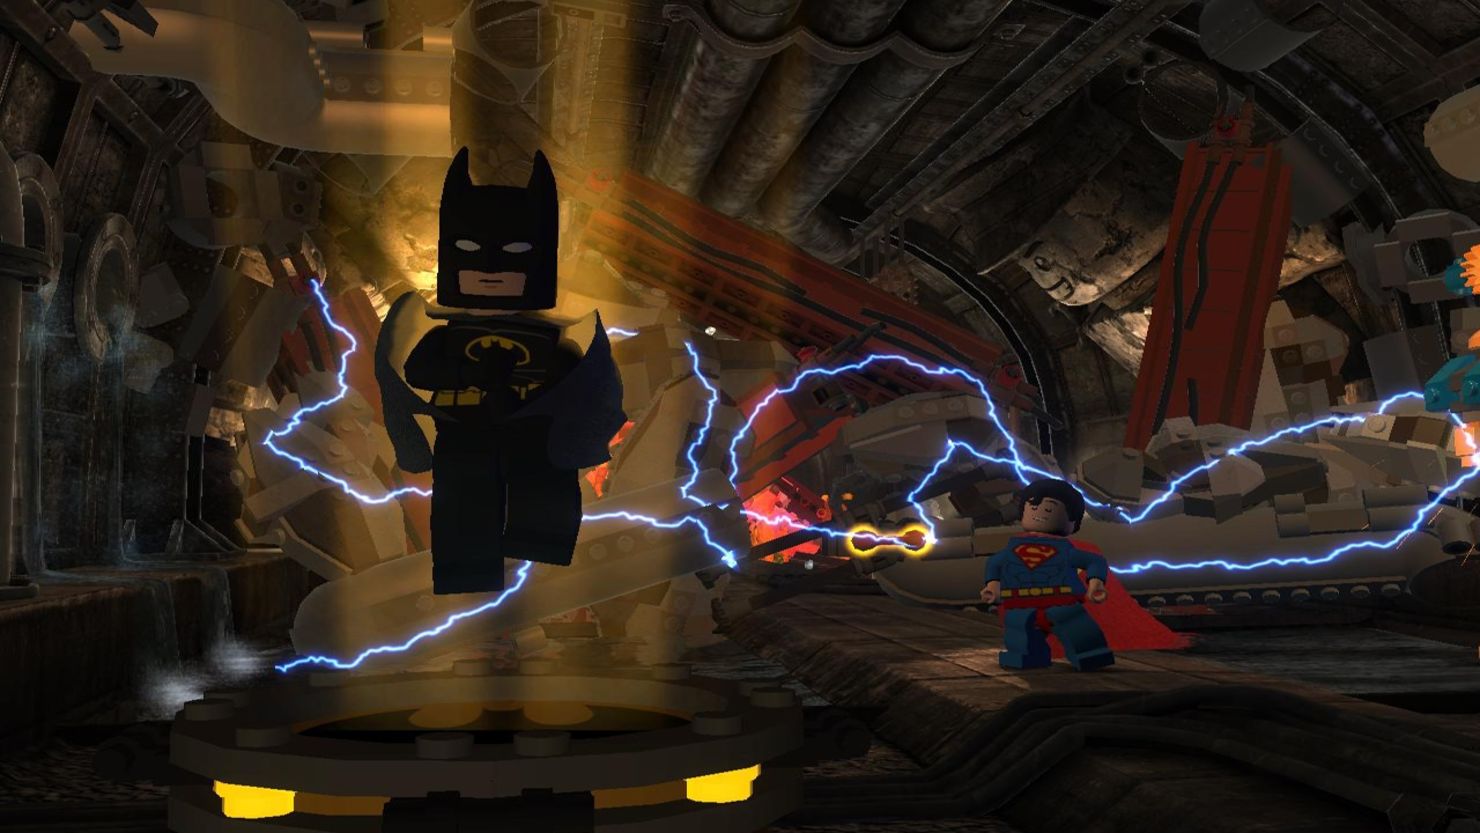 There's A New Hero In Town, The Lego Batman Movie Has Arrived